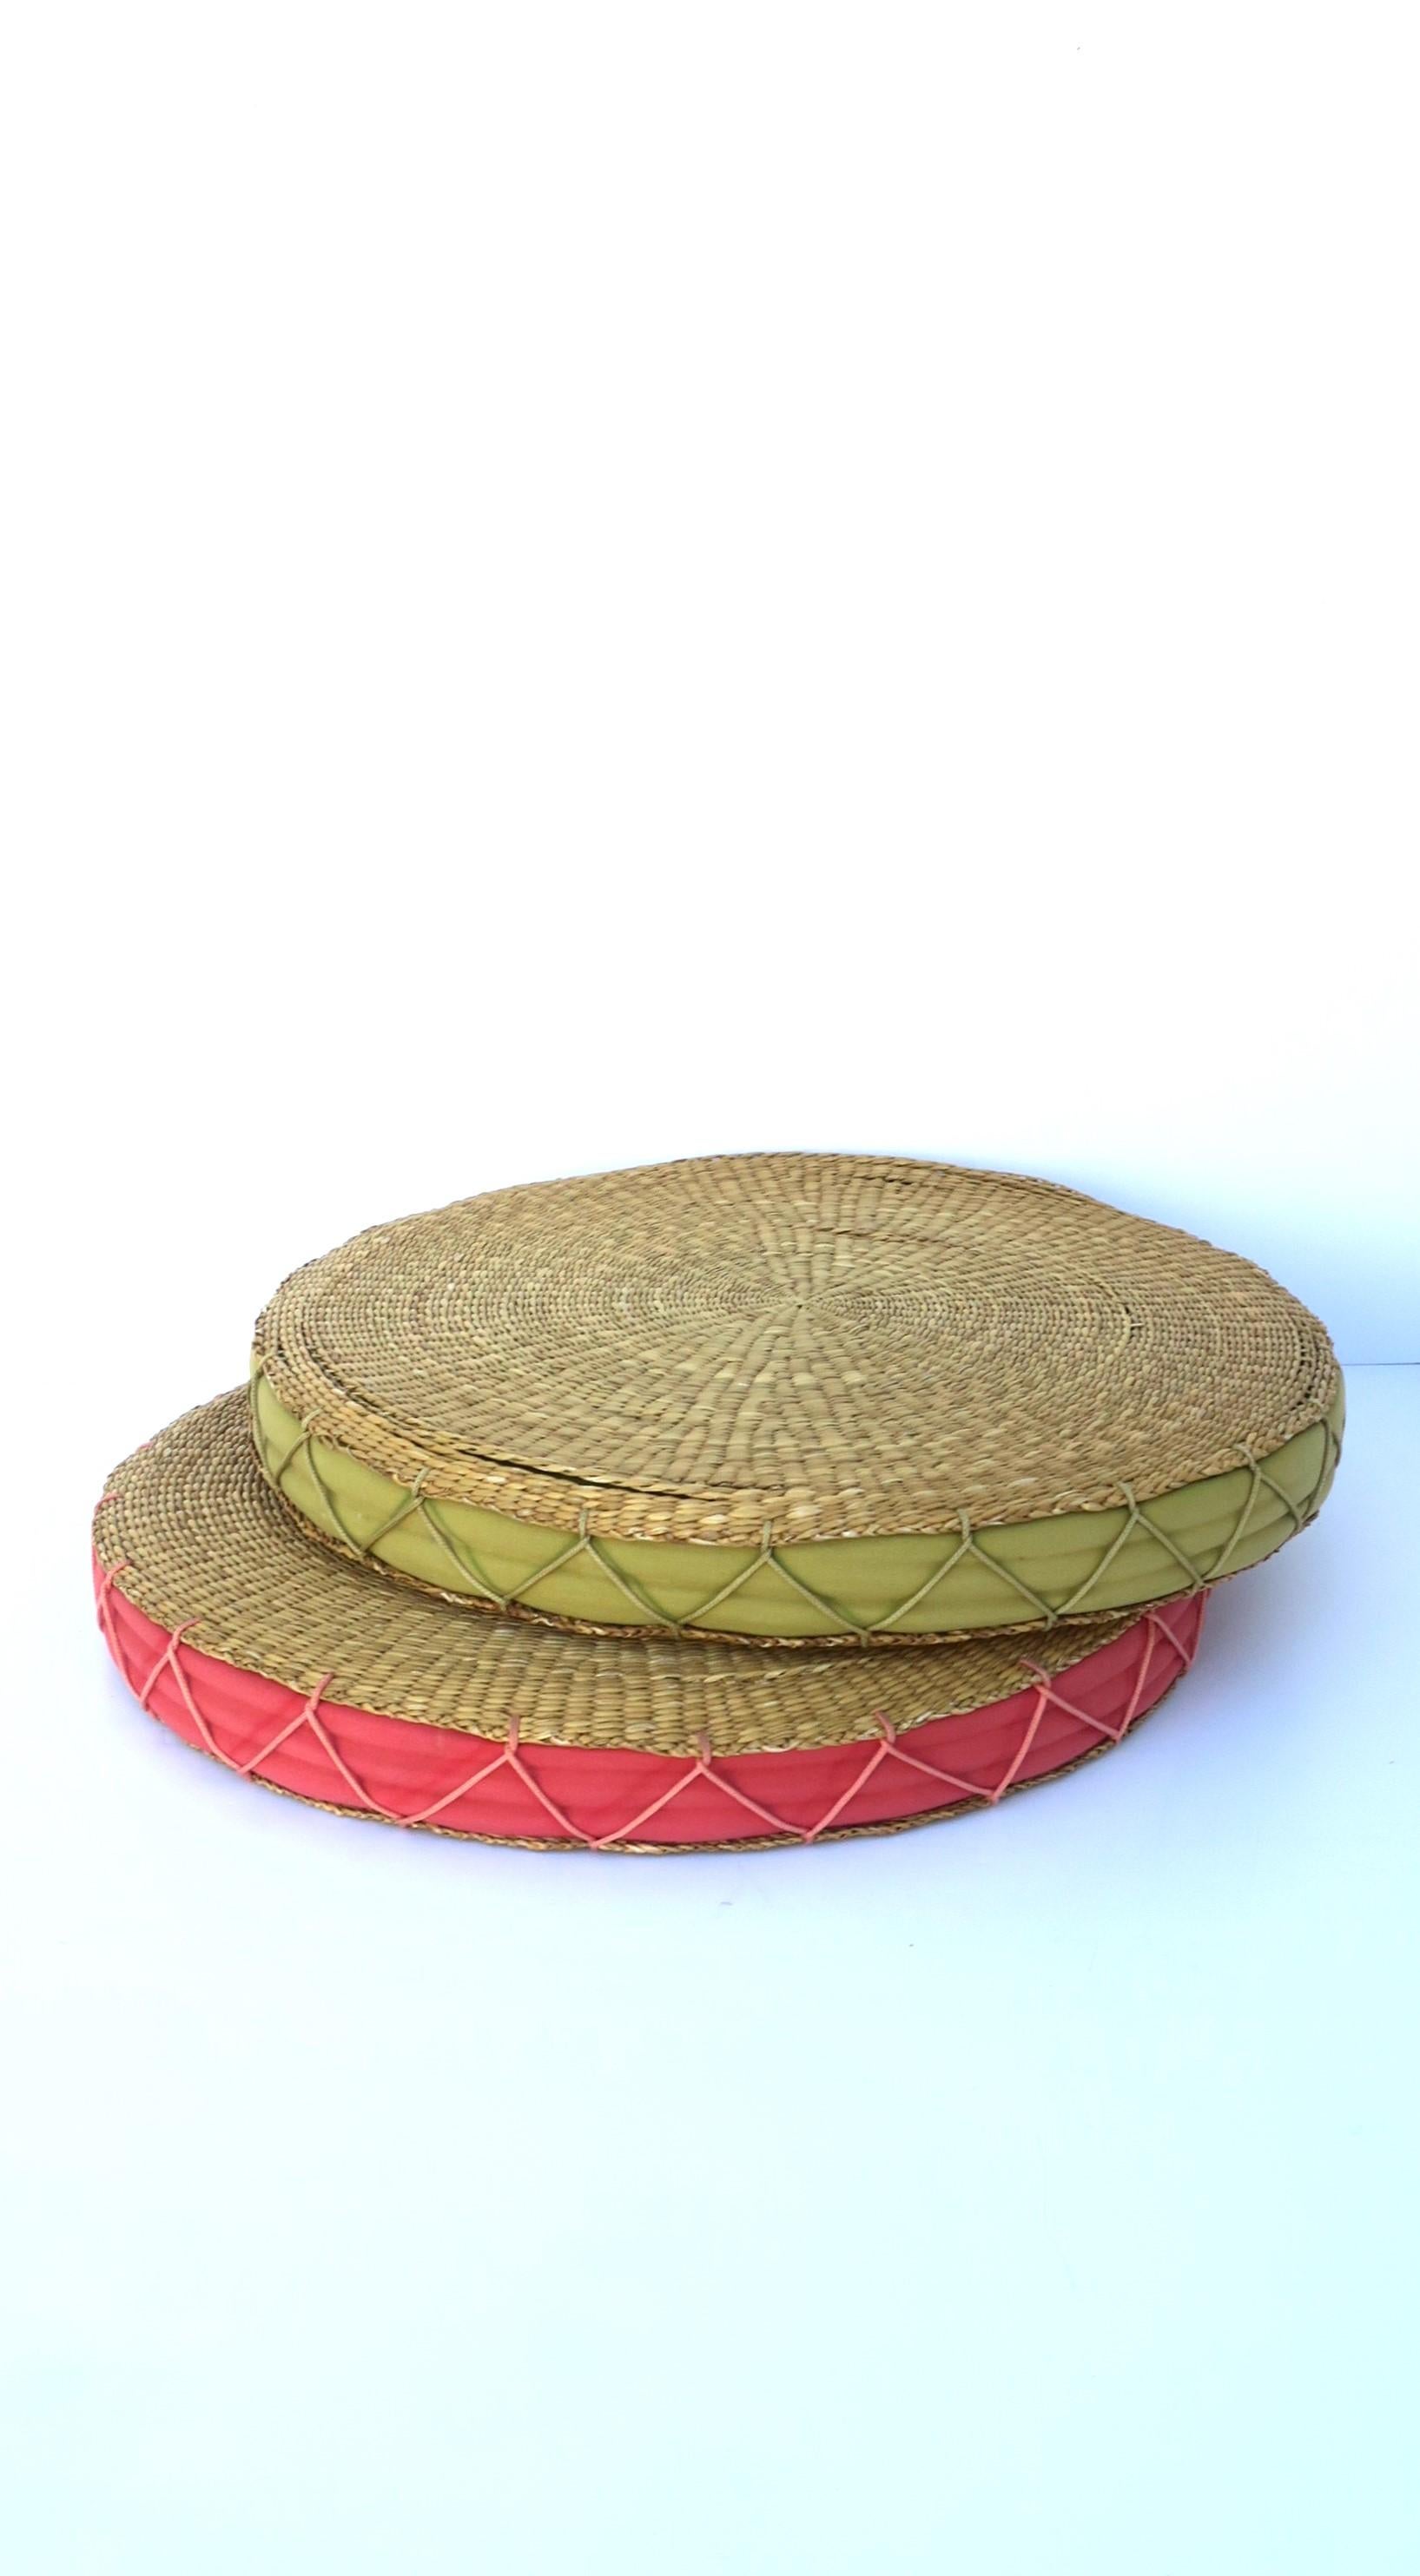 Wicker Seat or Floor Cushion, Watermelon Pink and Tan For Sale 2